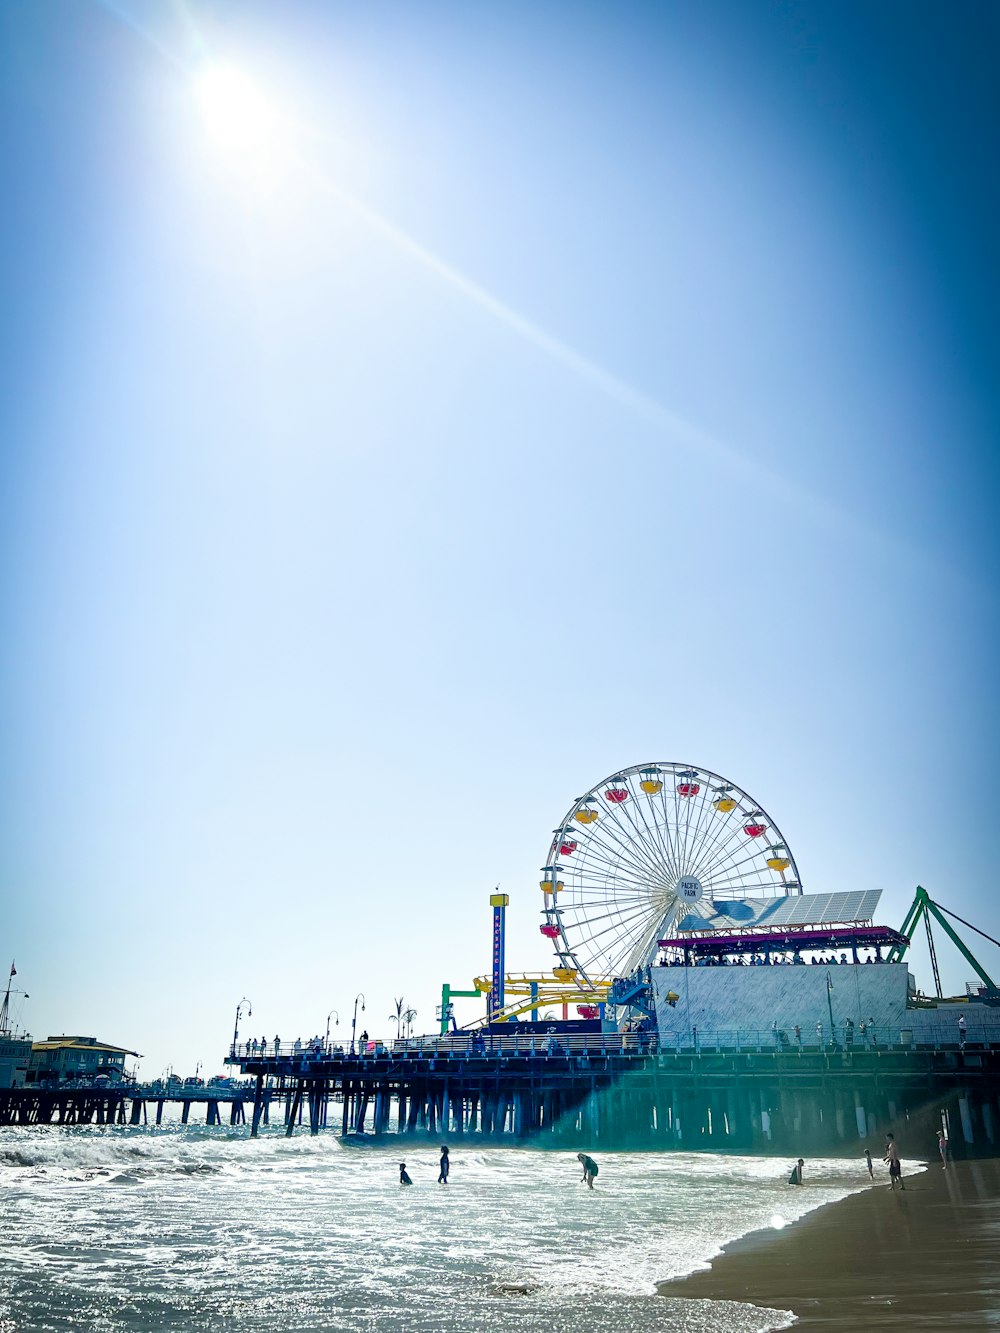 a large ferris wheel sitting next to a pier